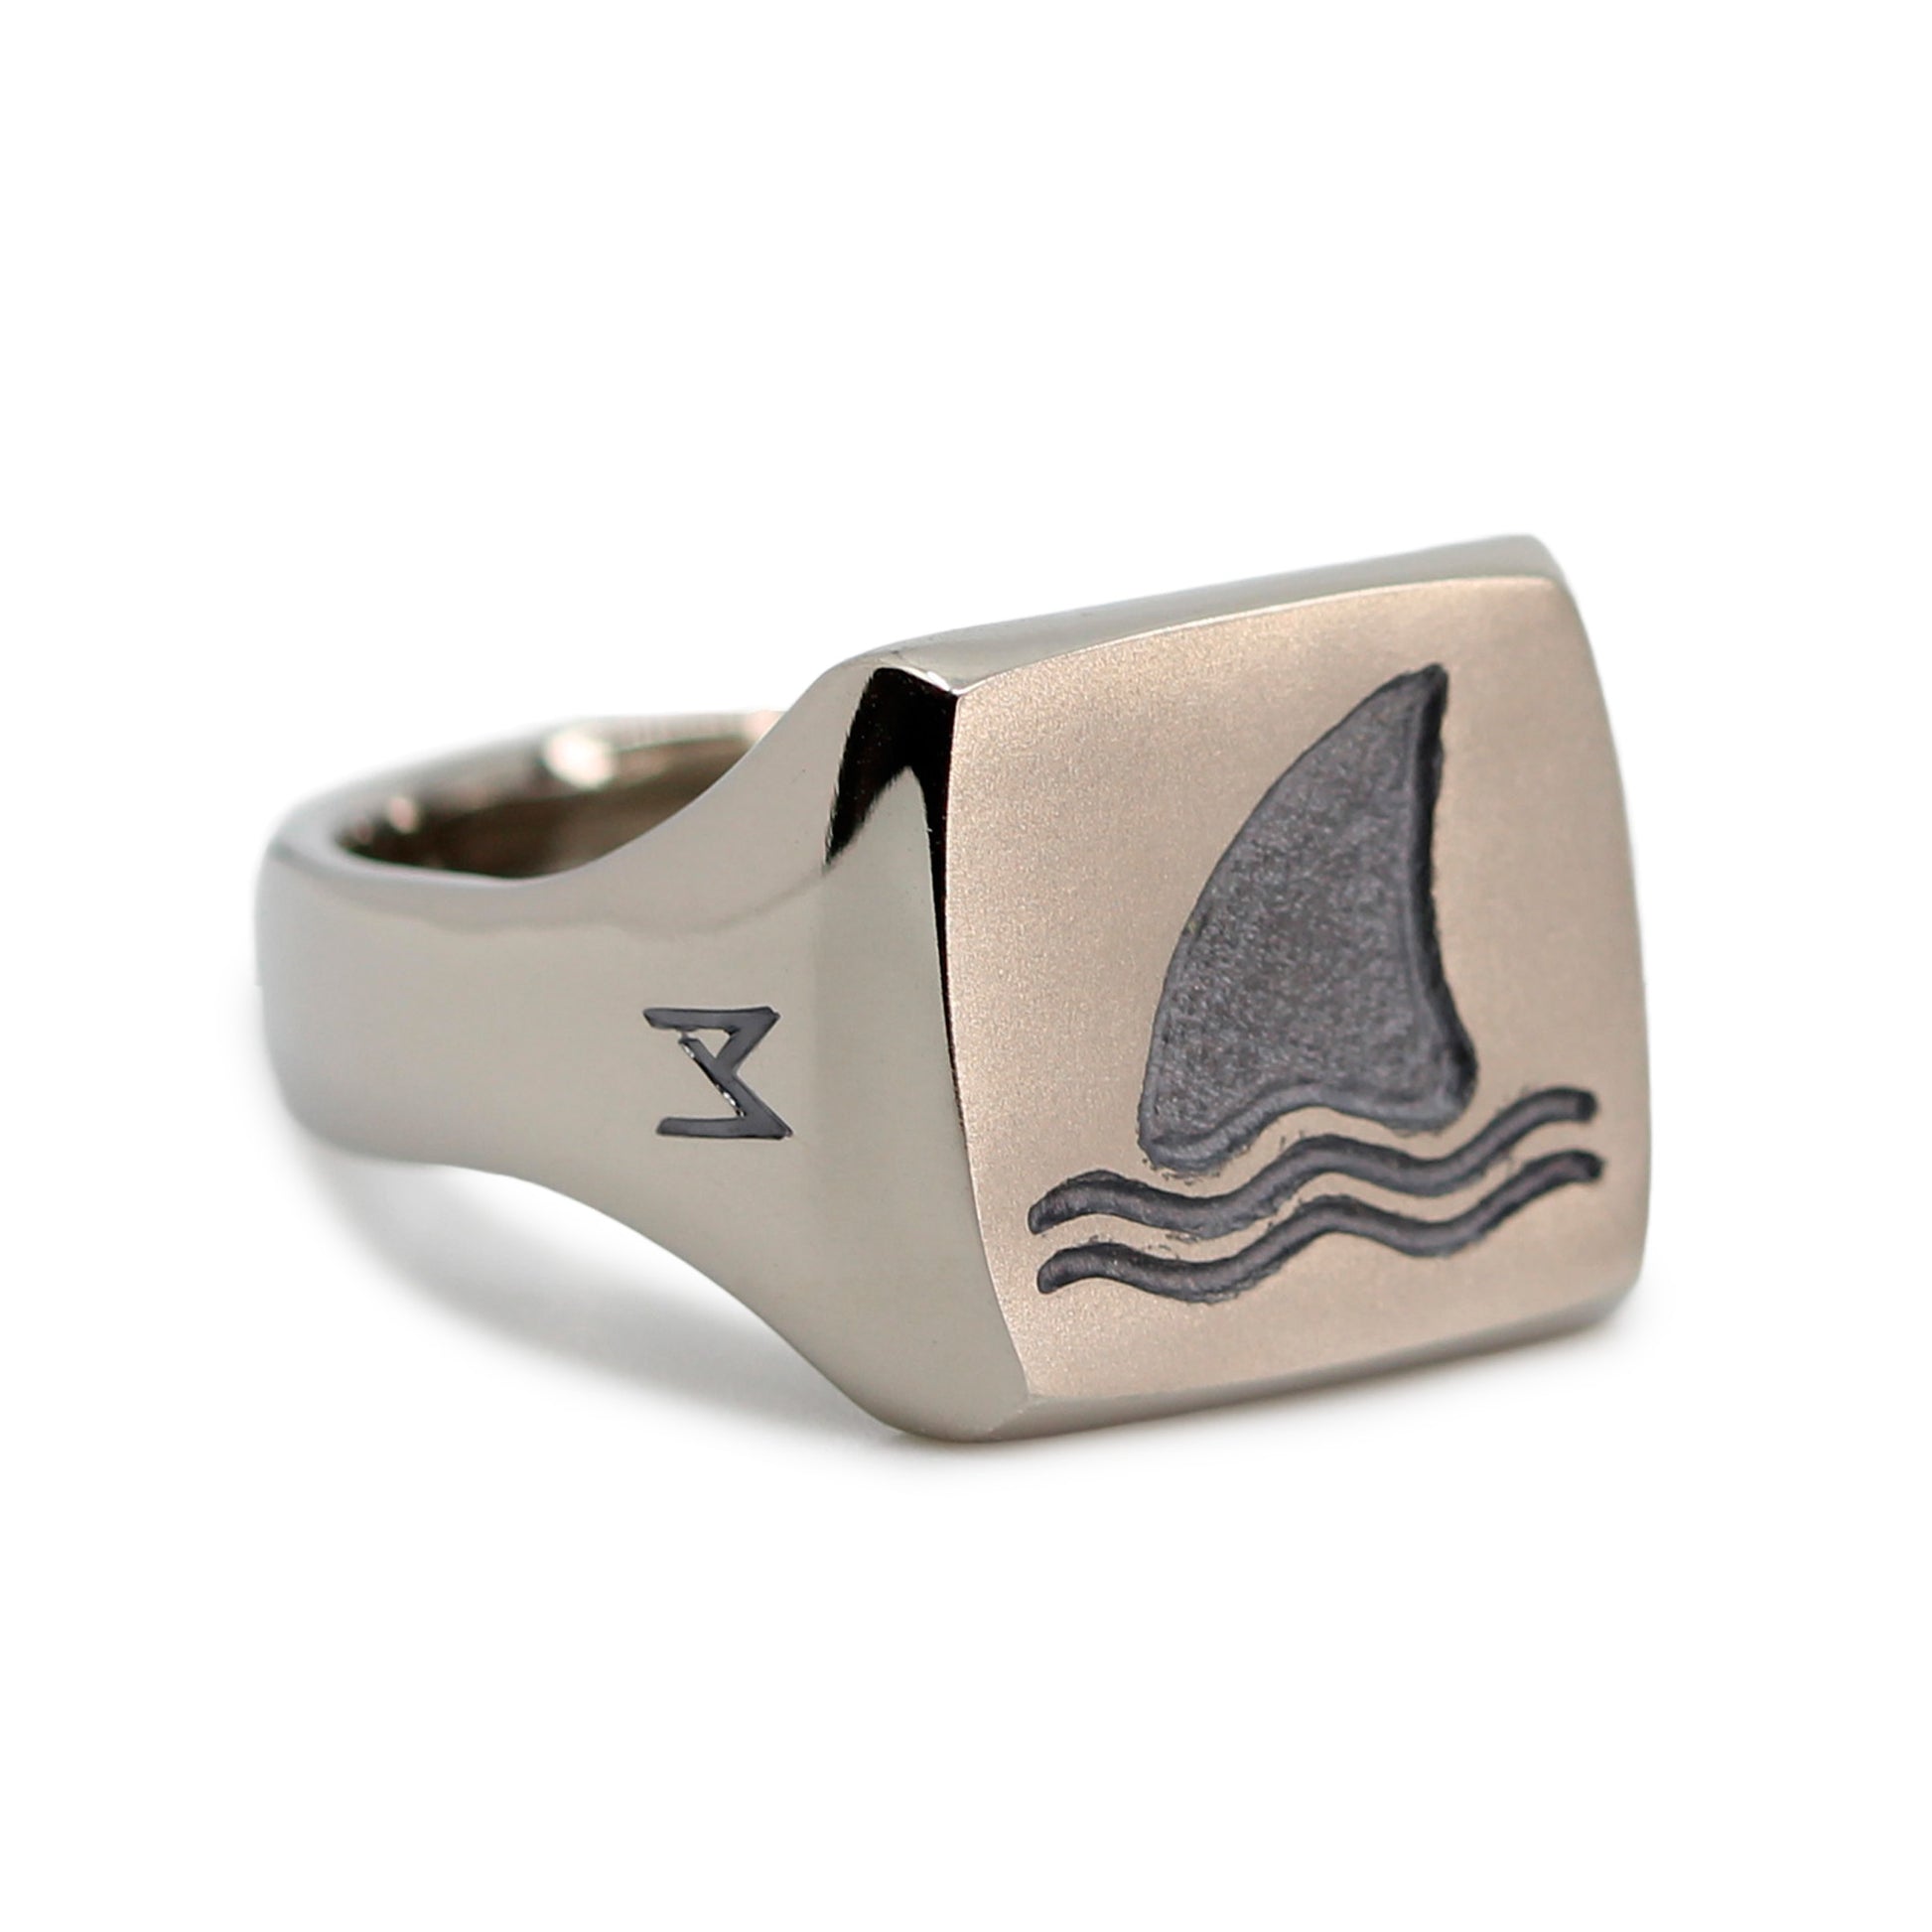 Single silver-colored titanium signet ring, 15x15 mm wide surface with an engraved shark fin. Image shows corner view of the ring